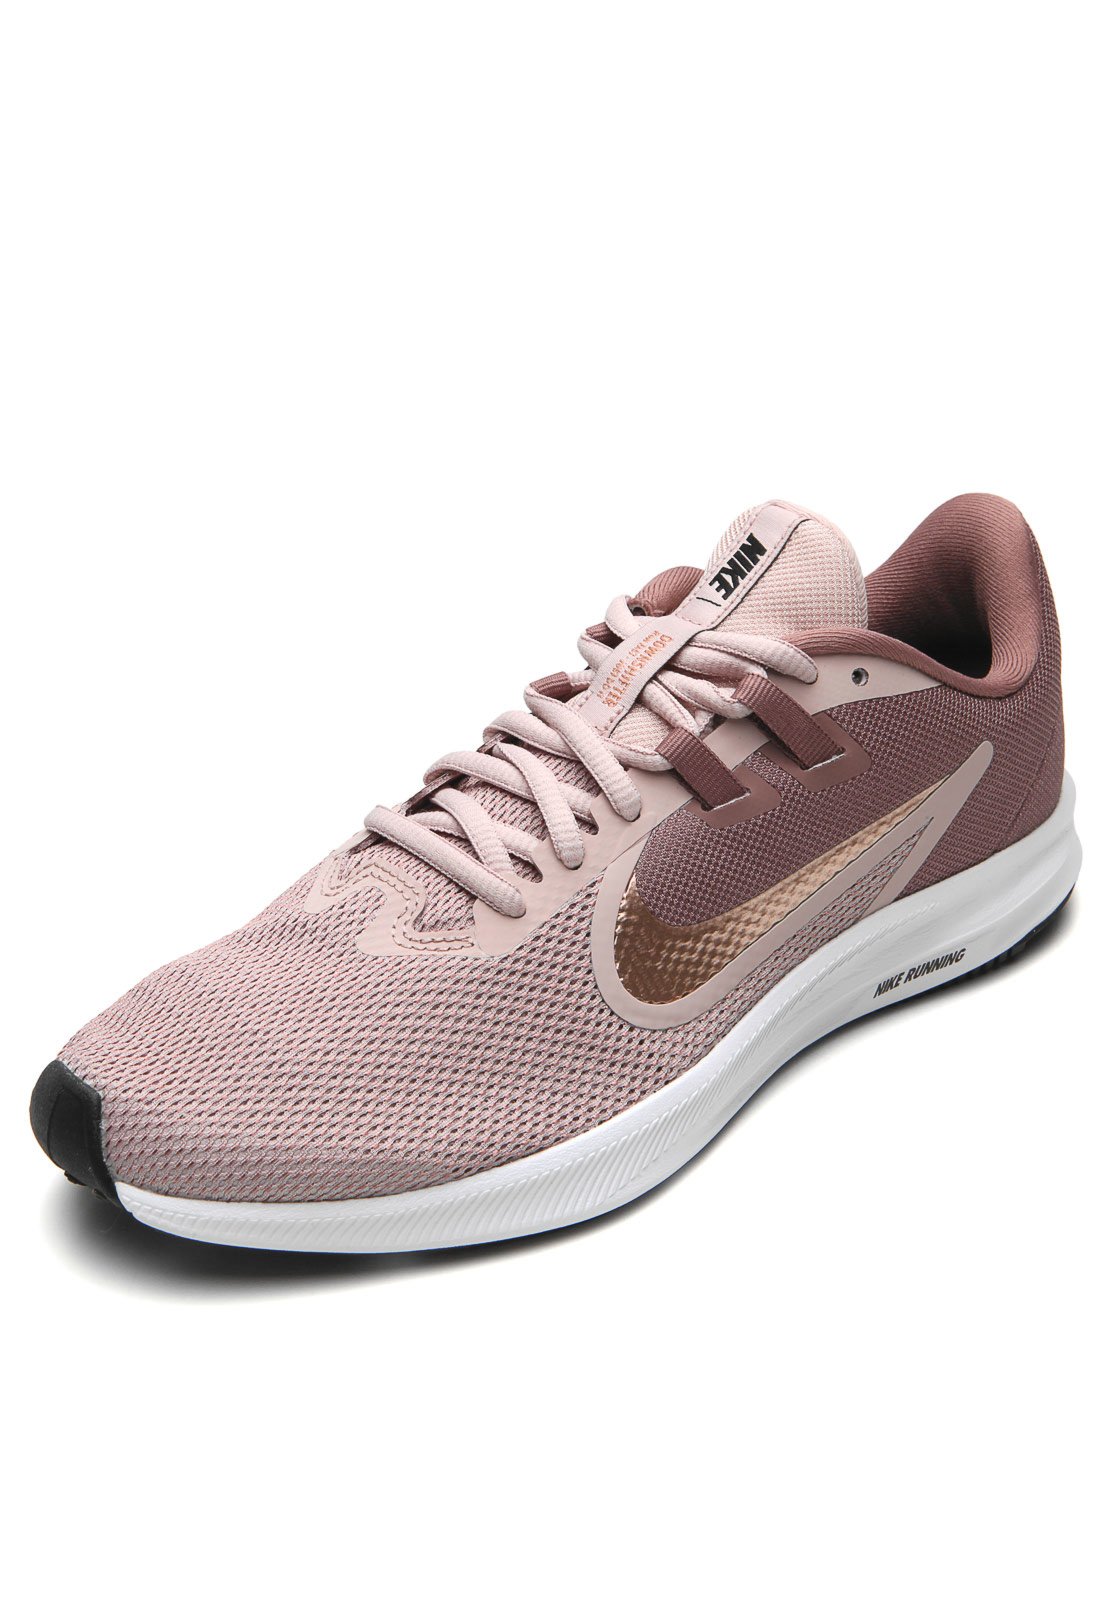 nike wmns downshifter 